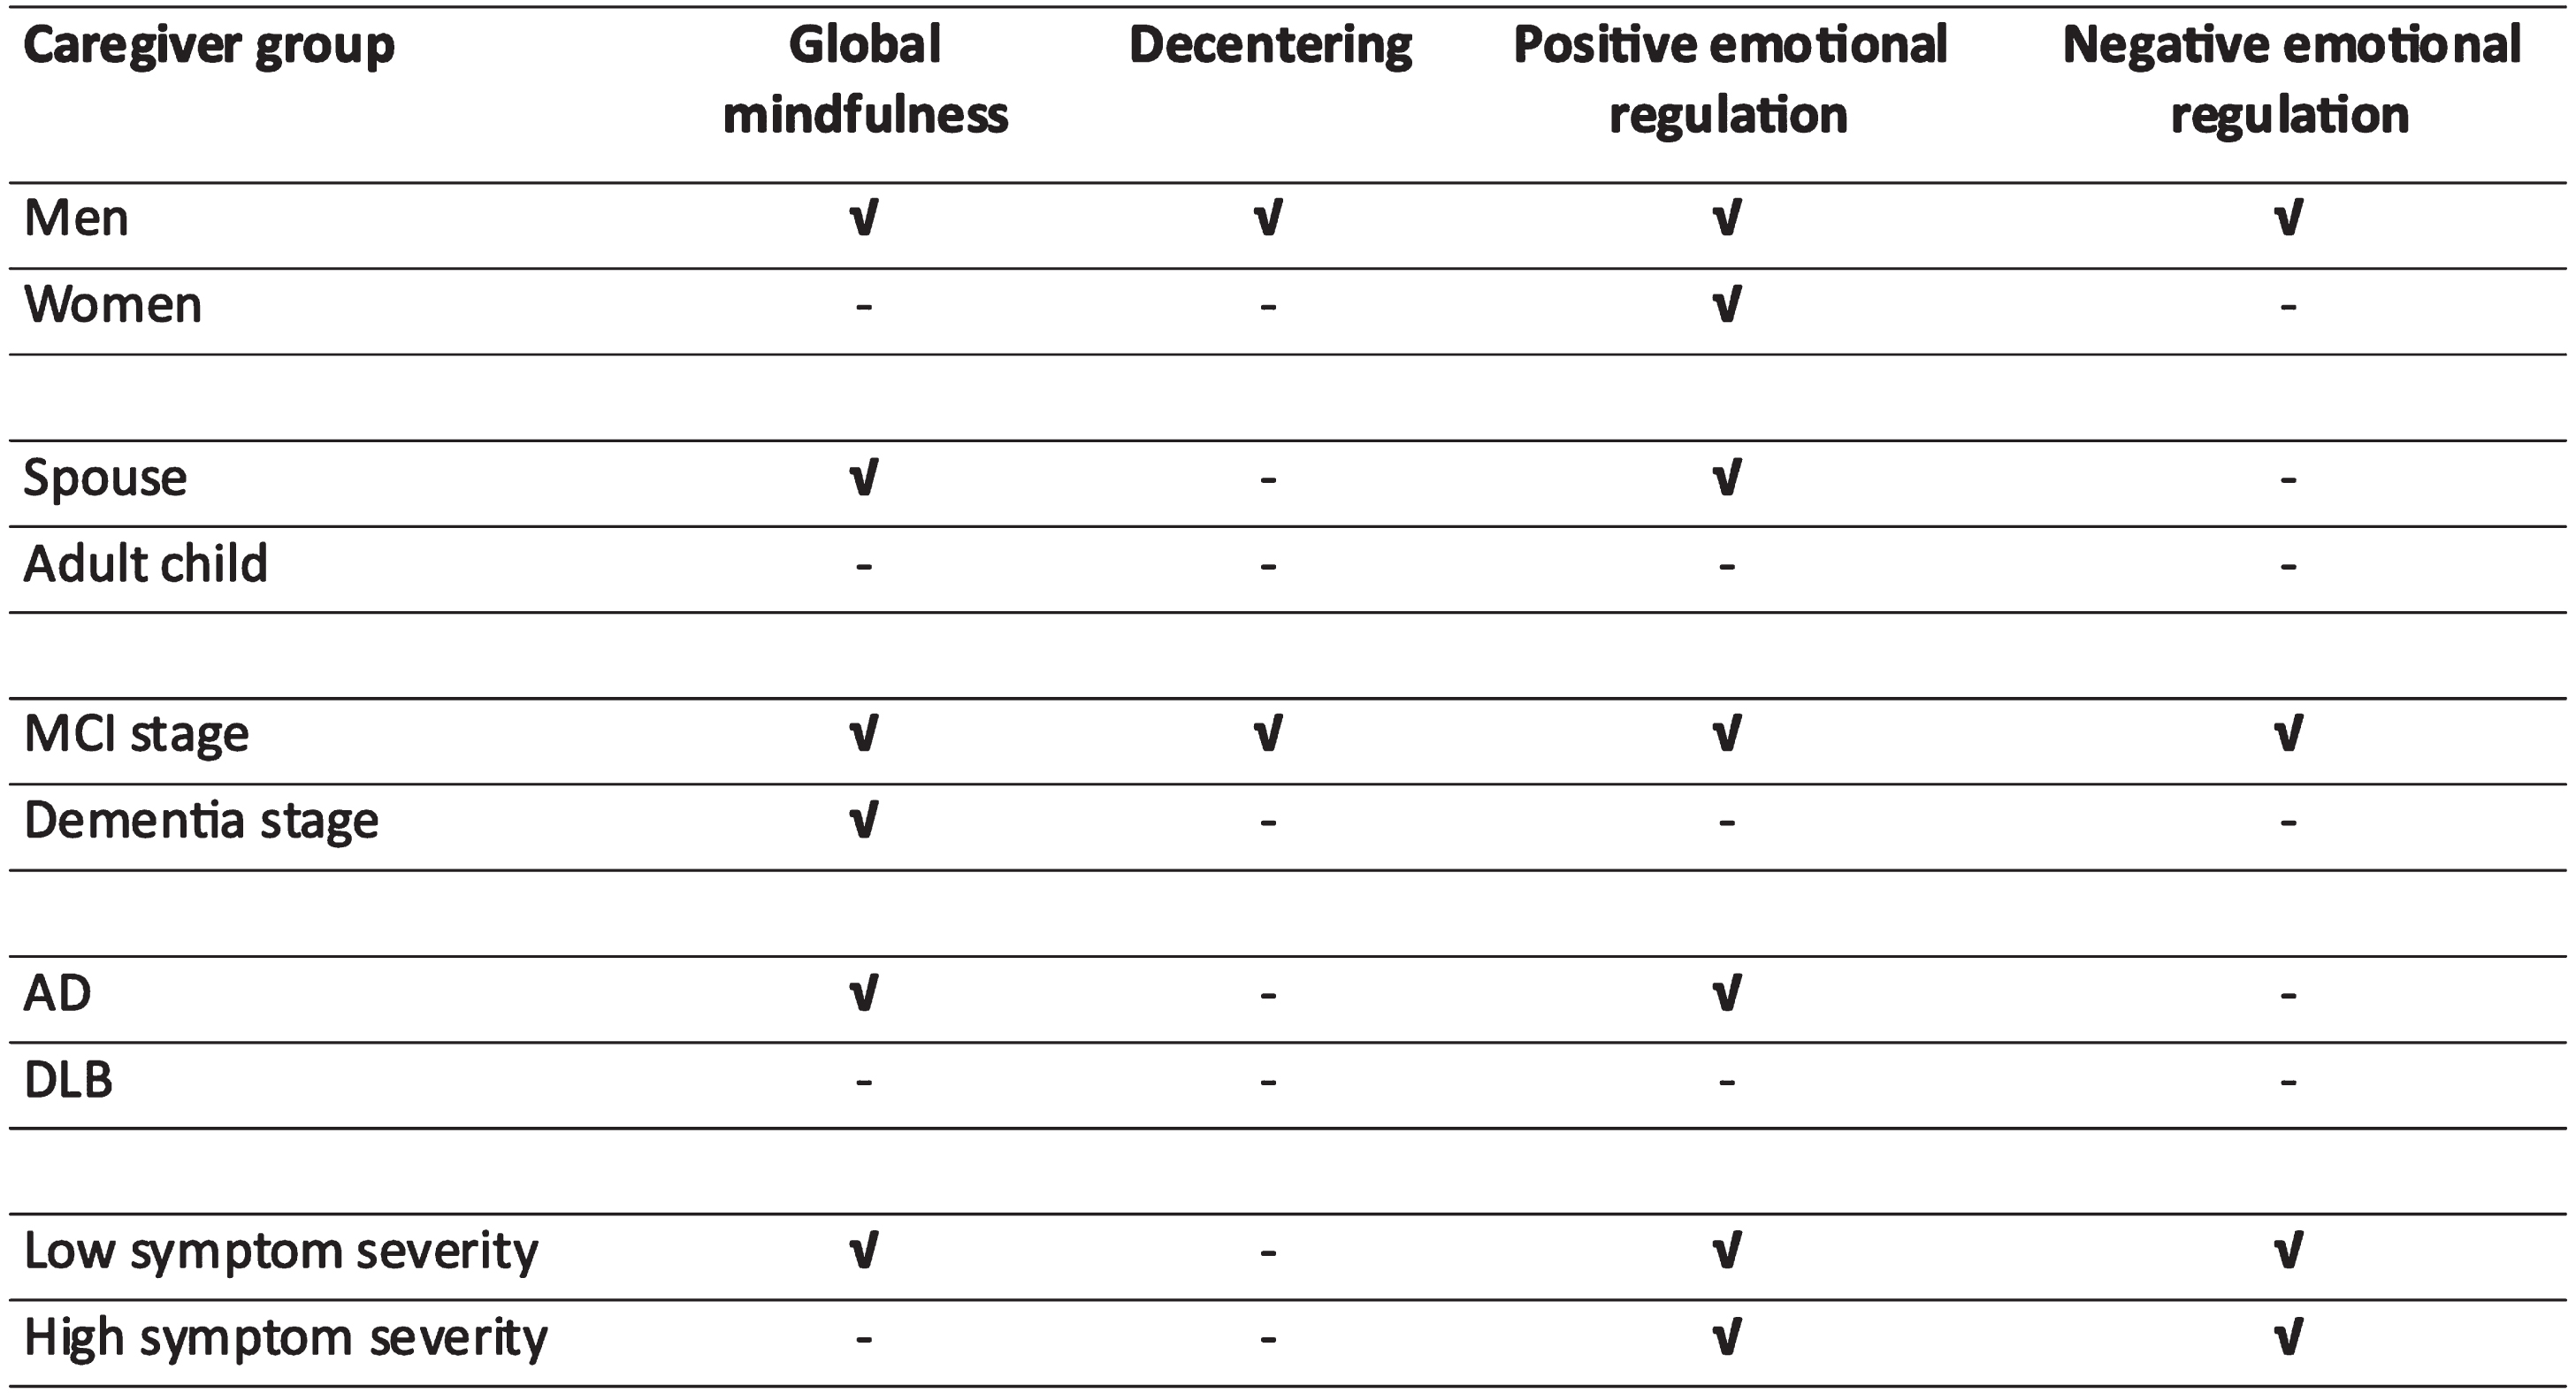 Significant relationships between mindfulness measures and caregiver outcomes across caregiver groups. Groups are based on caregiver and patient characteristics. Significance based on at least 2 out of 5 outcomes being significantly related to each mindfulness measure at p < 0.05; MS = marginal significance (1 out of 5 outcomes significant).